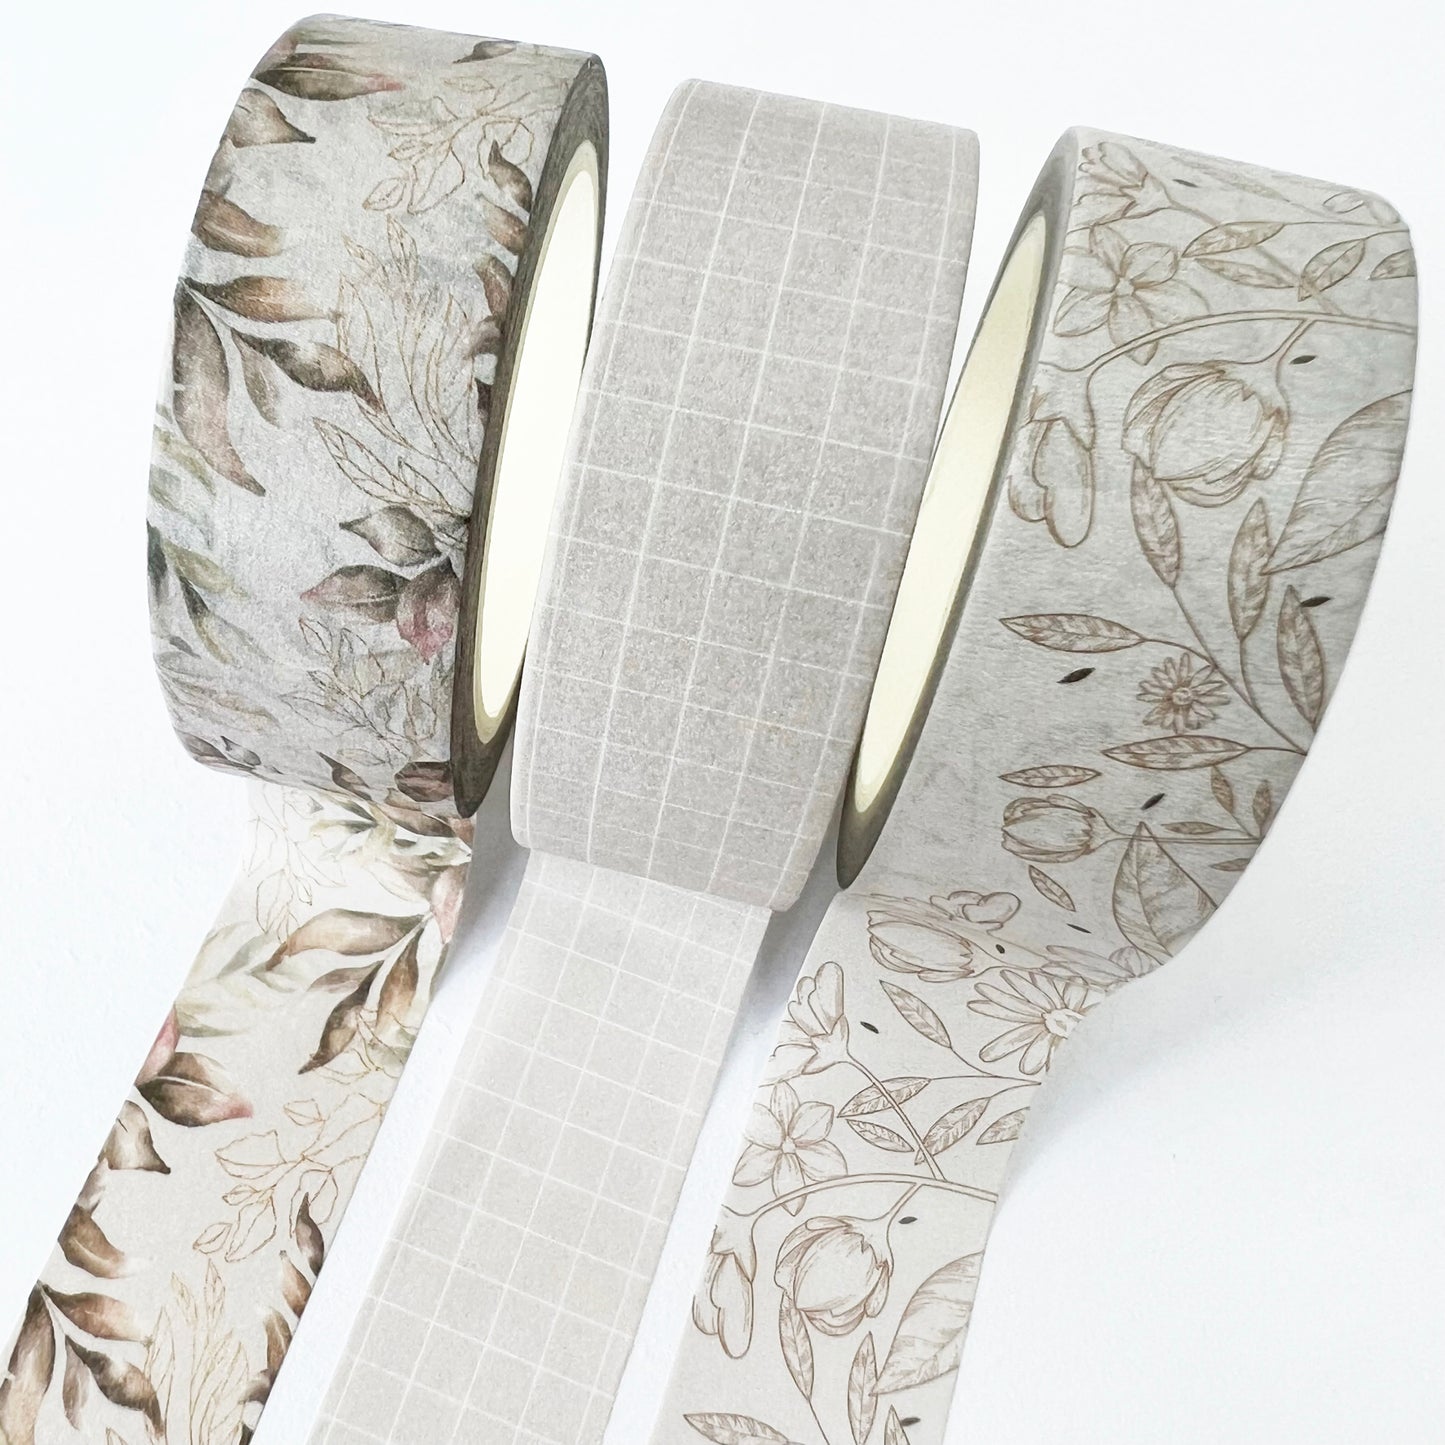 Floral Washi Tape Set of 3 | Neutral Tones | 1.5cm x 10m x 3 | Stationery Scrapbooking Journalling